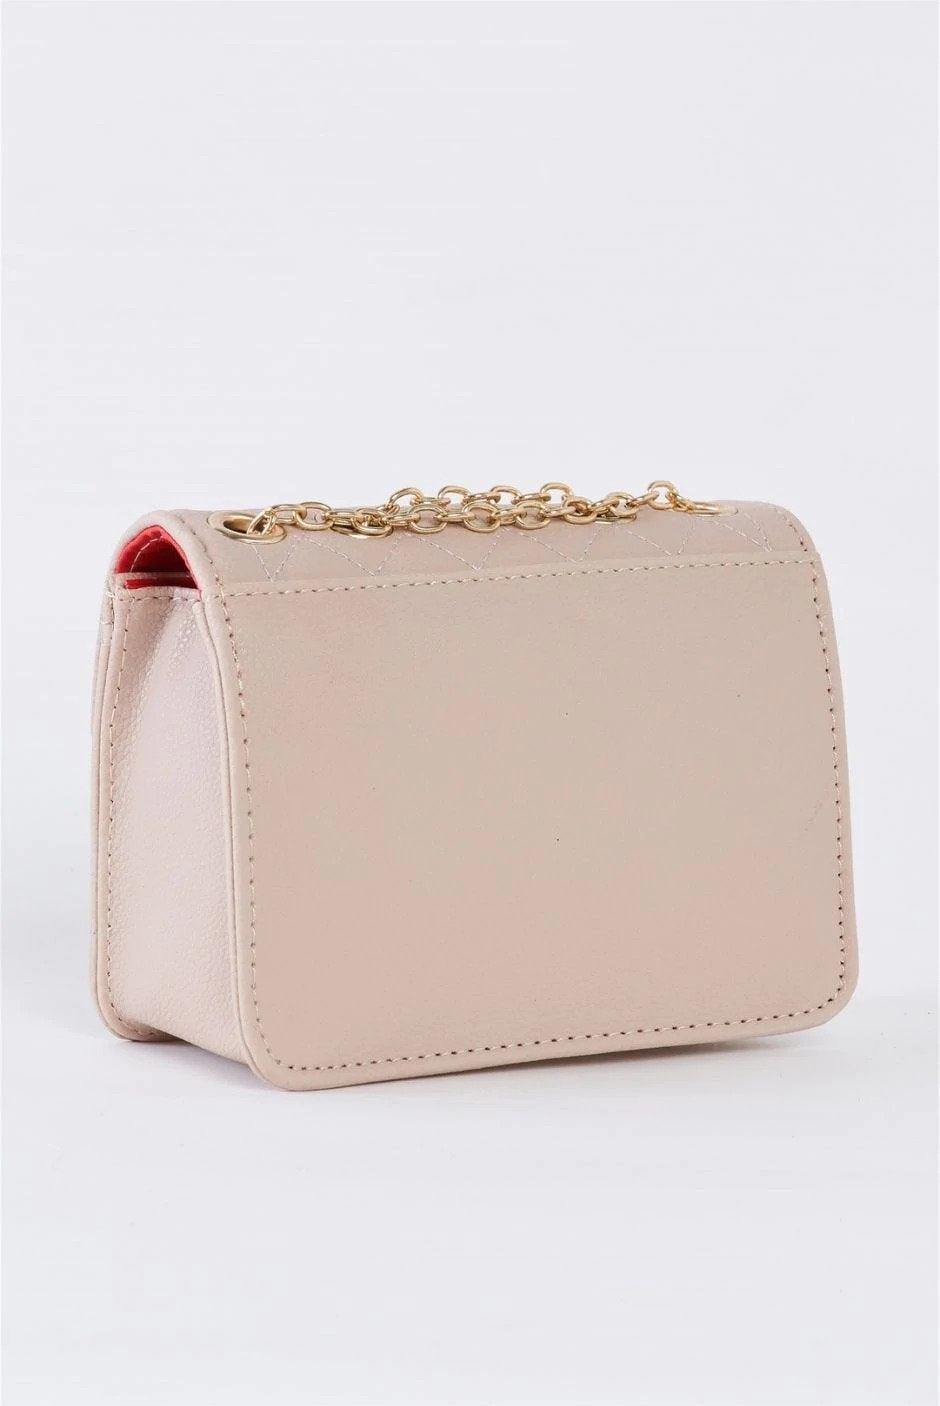 Nude Vegan Leather Quilted Chain Crossbody Bag /1 Bag